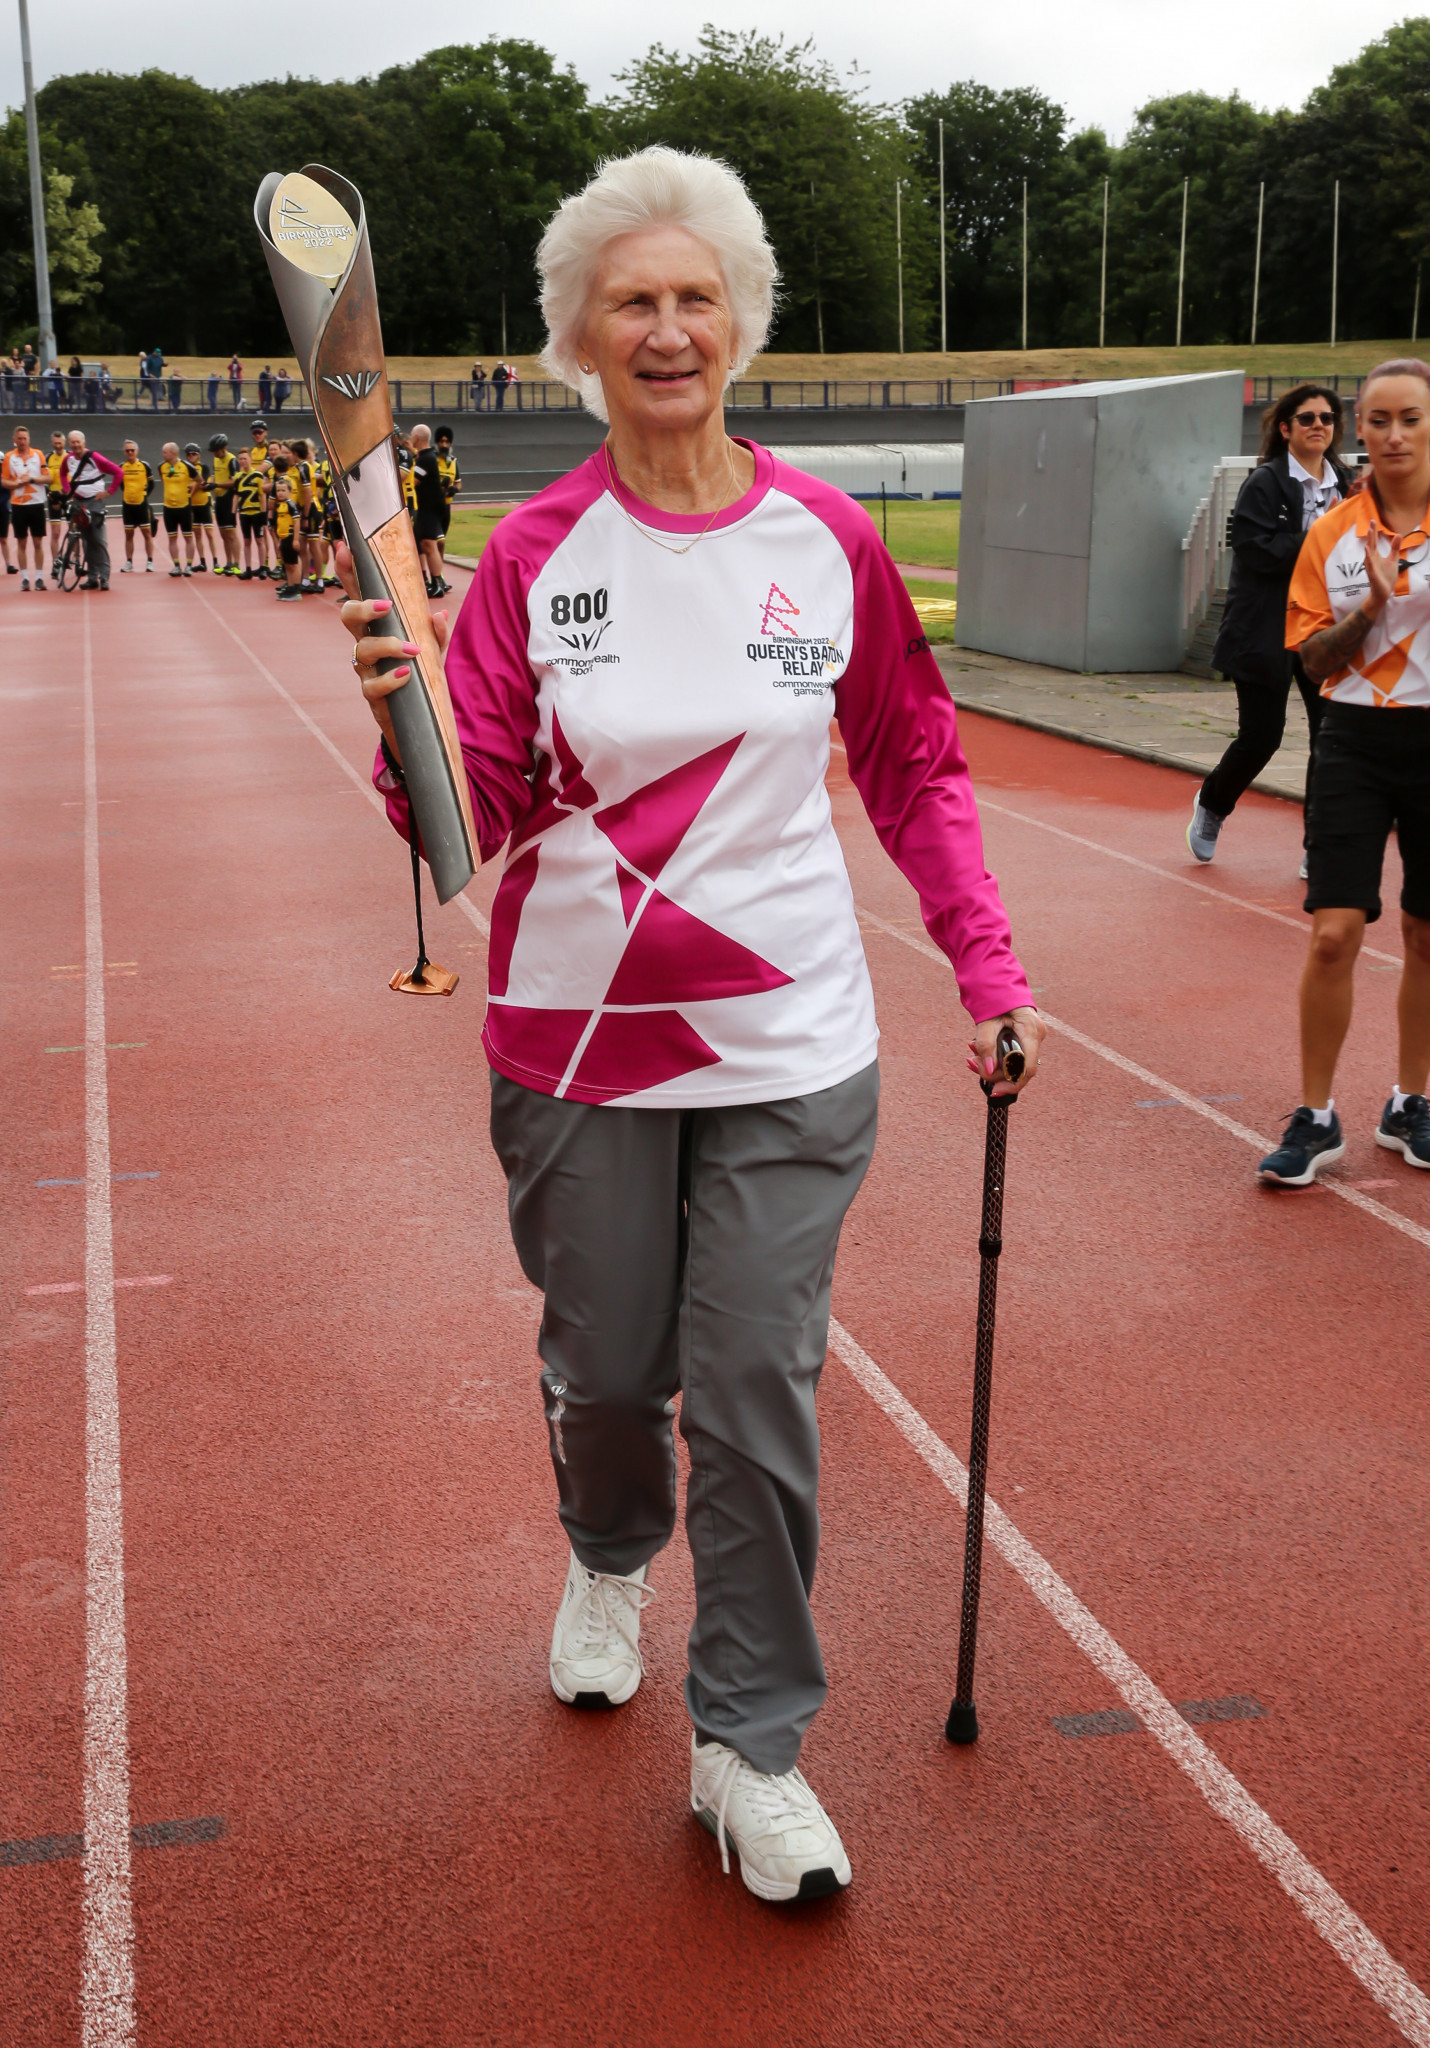 Anita Lonsbrough participated in the Queen's Baton Relay during Birmingham 2022 ©Getty Images